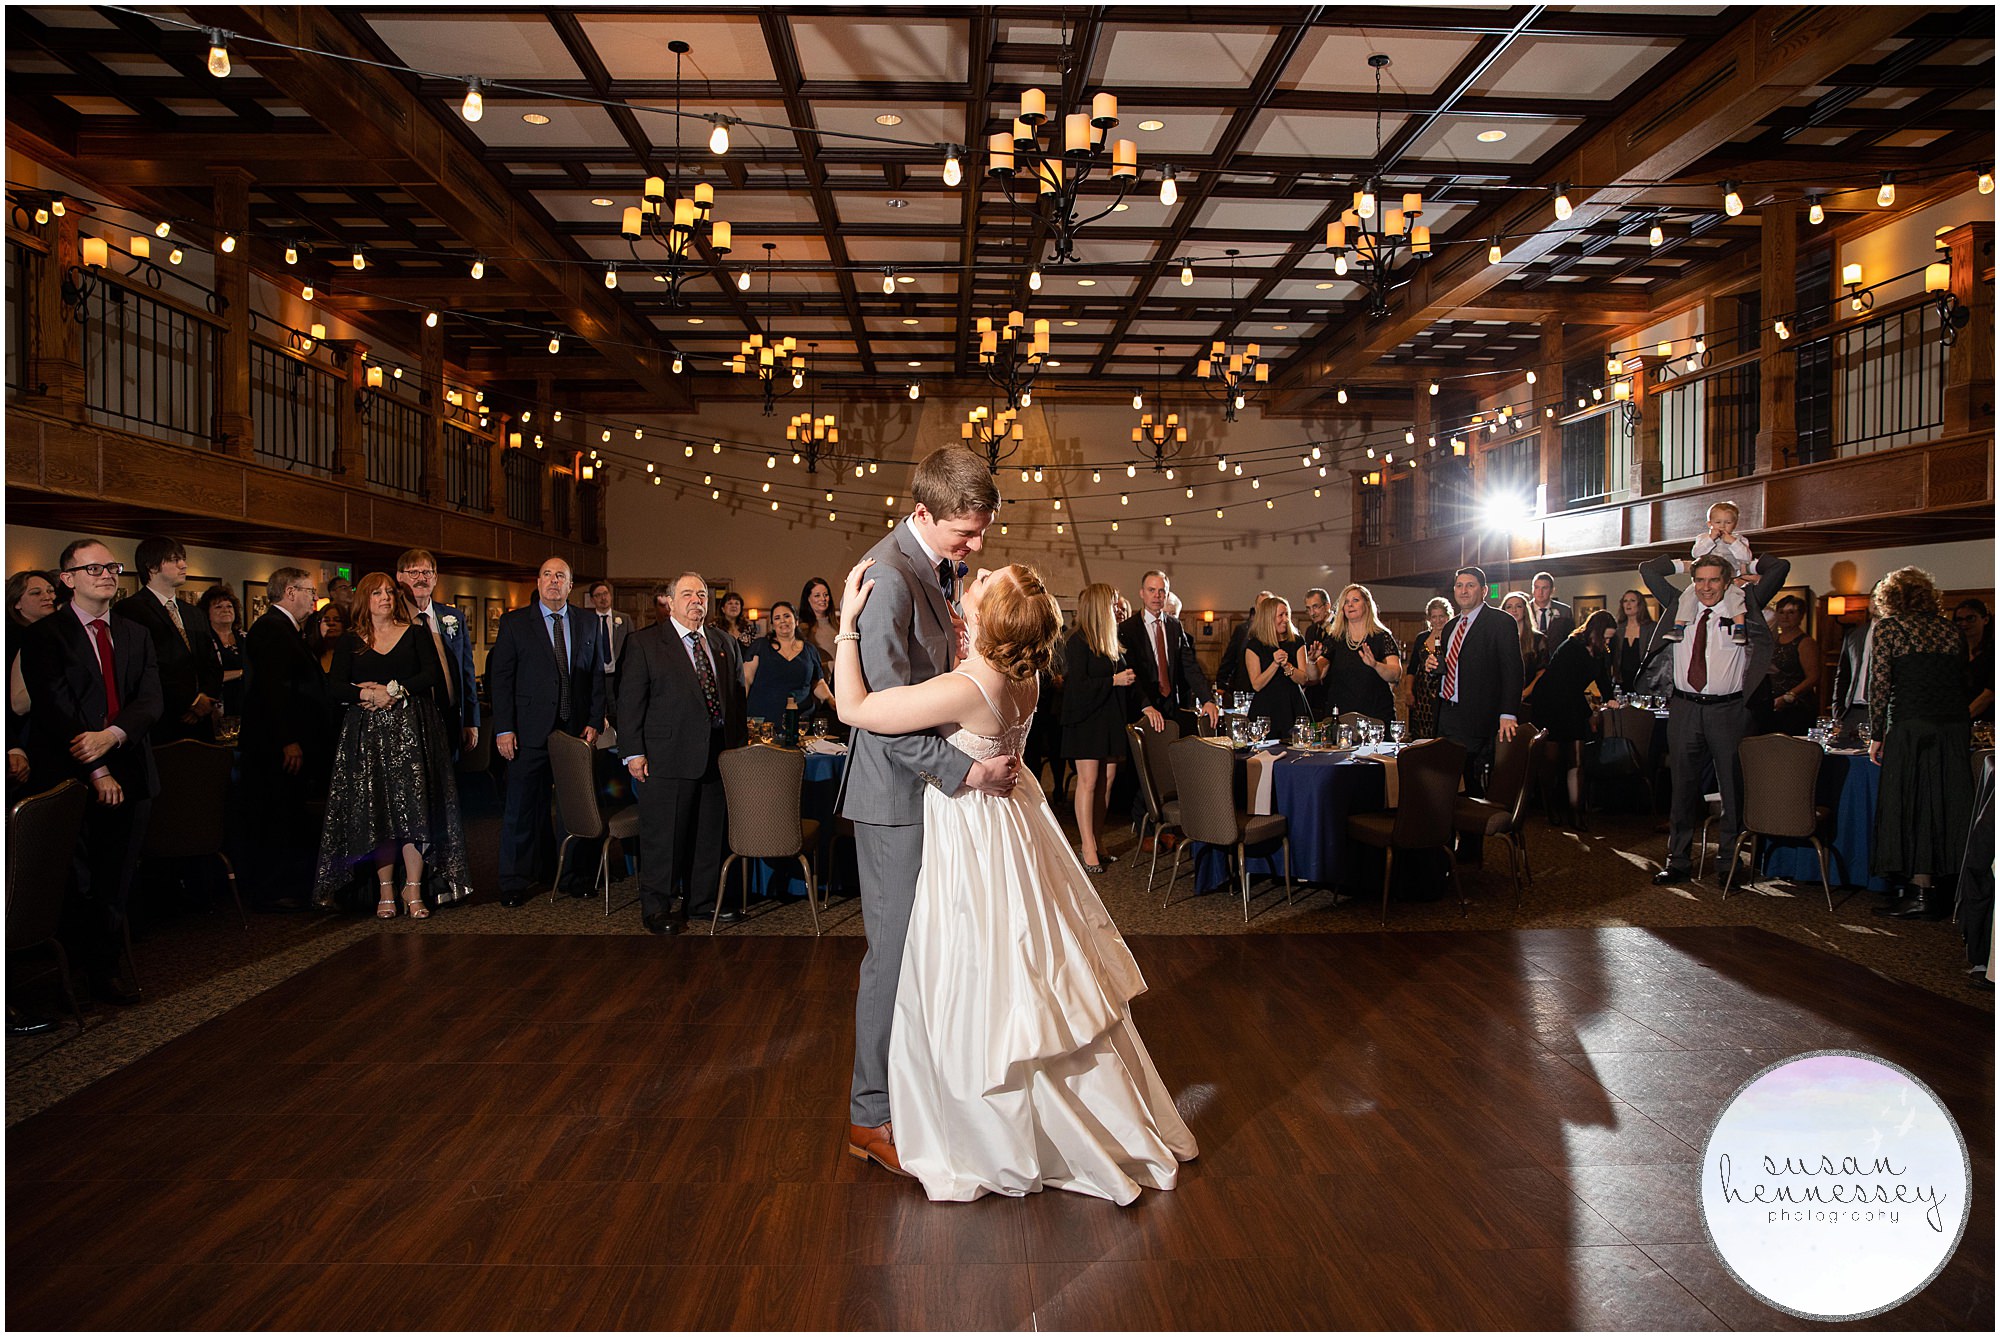 First dance for bride and groom at classic wedding 